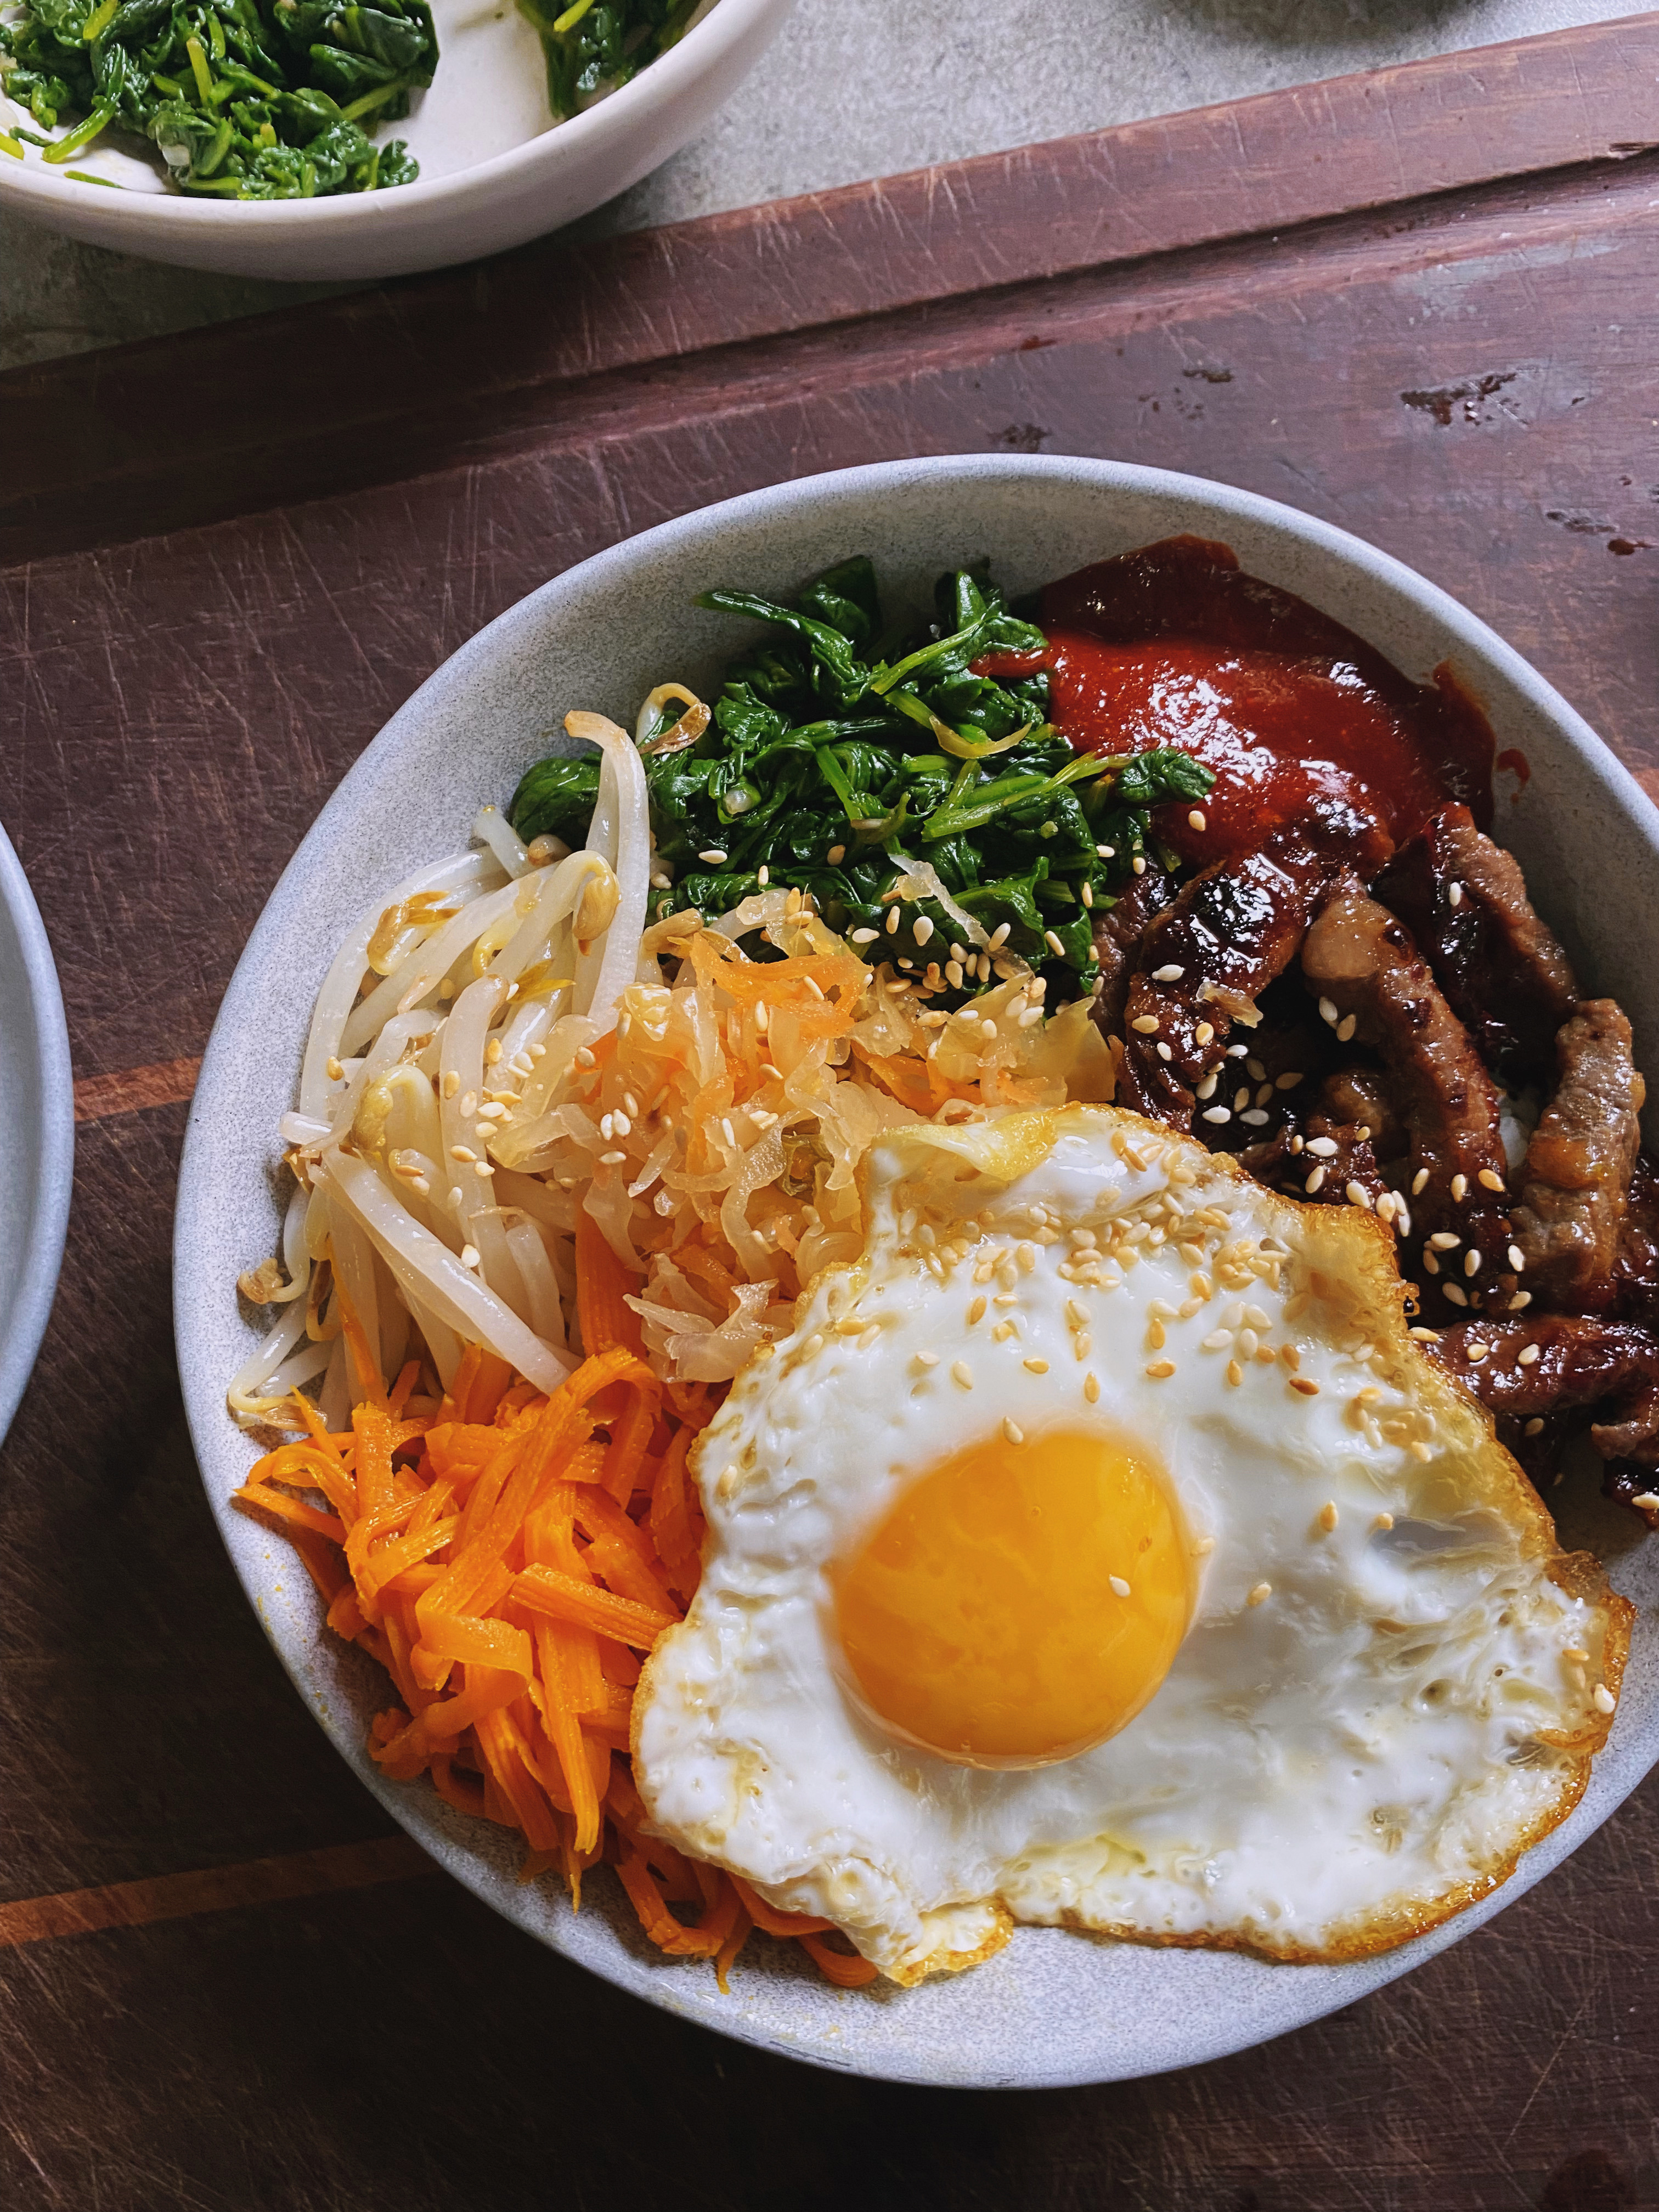 A bowl of beef bibimbap, with veggies and an egg